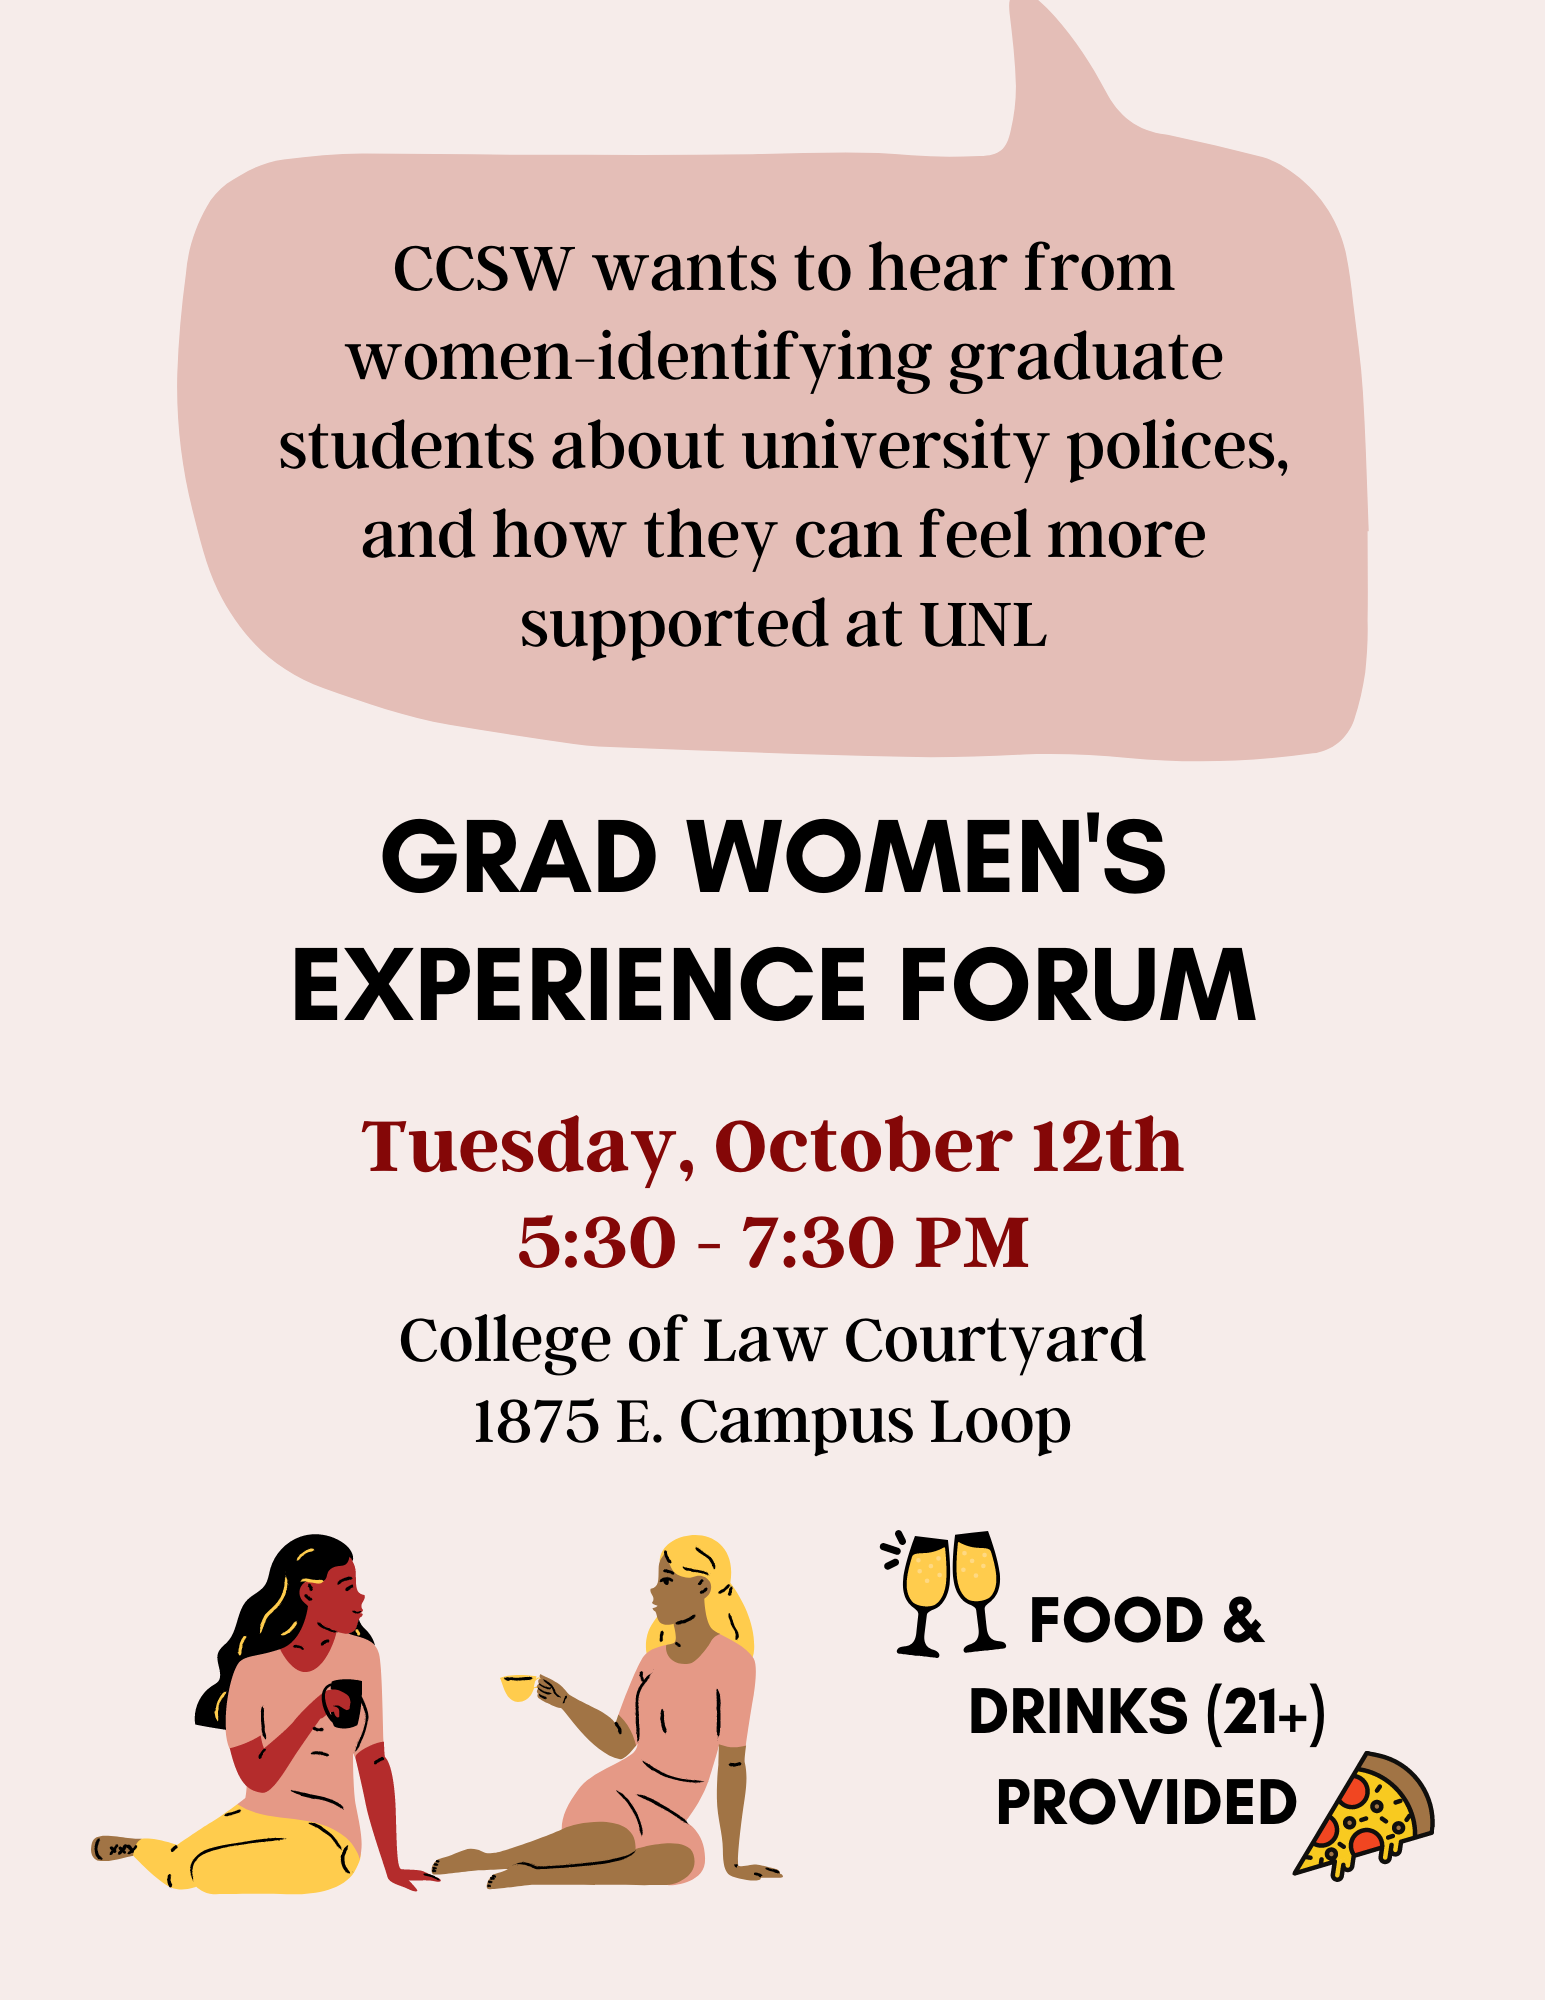 During this forum, the council wants to hear your experiences as women, graduate students at the institution, issues that have arisen, suggestions for policy changes, etc. 